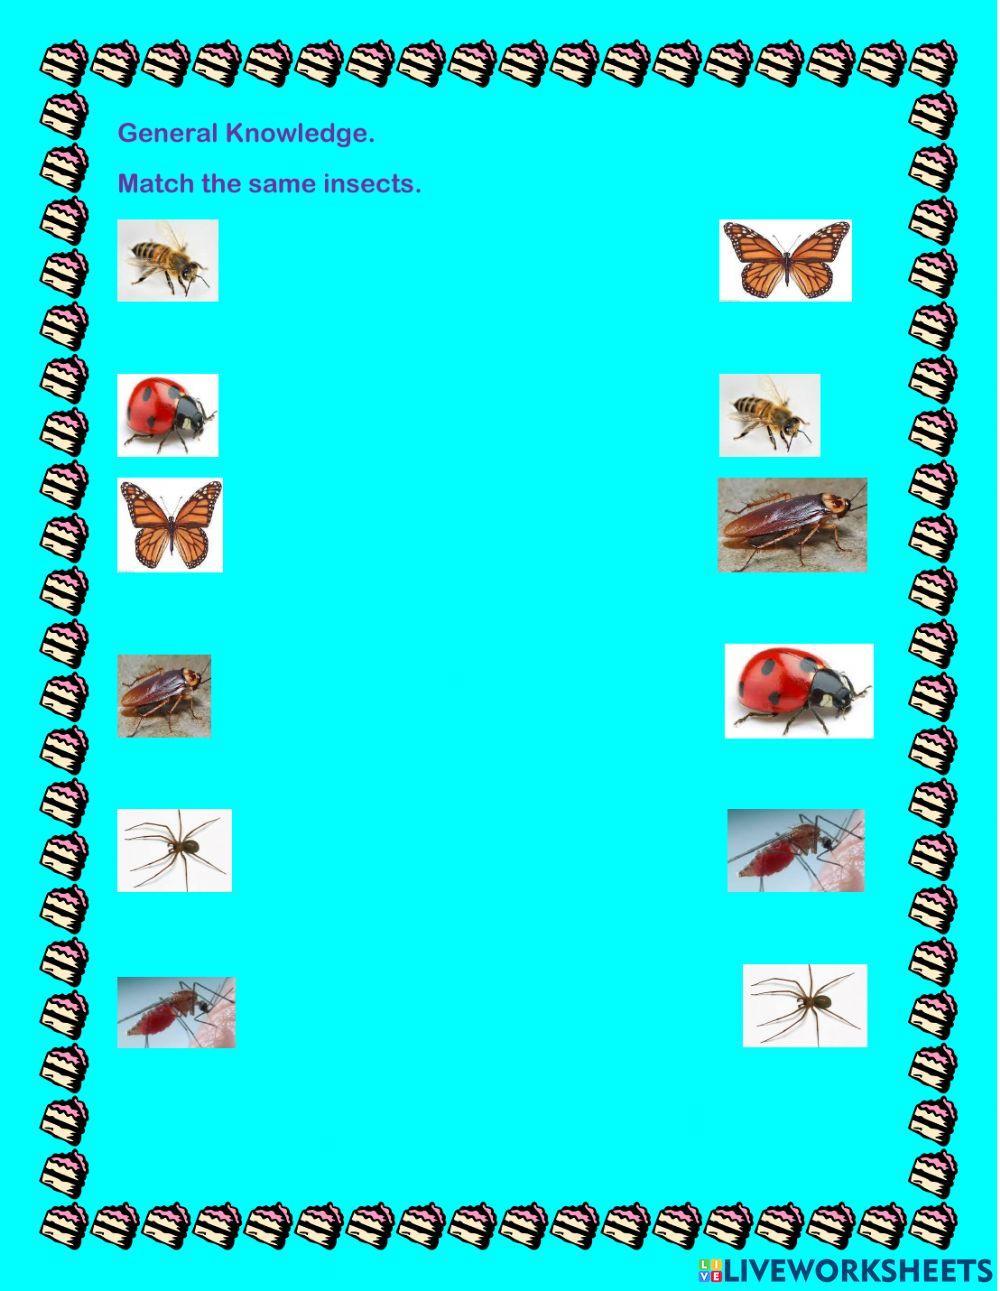 Match the same insects